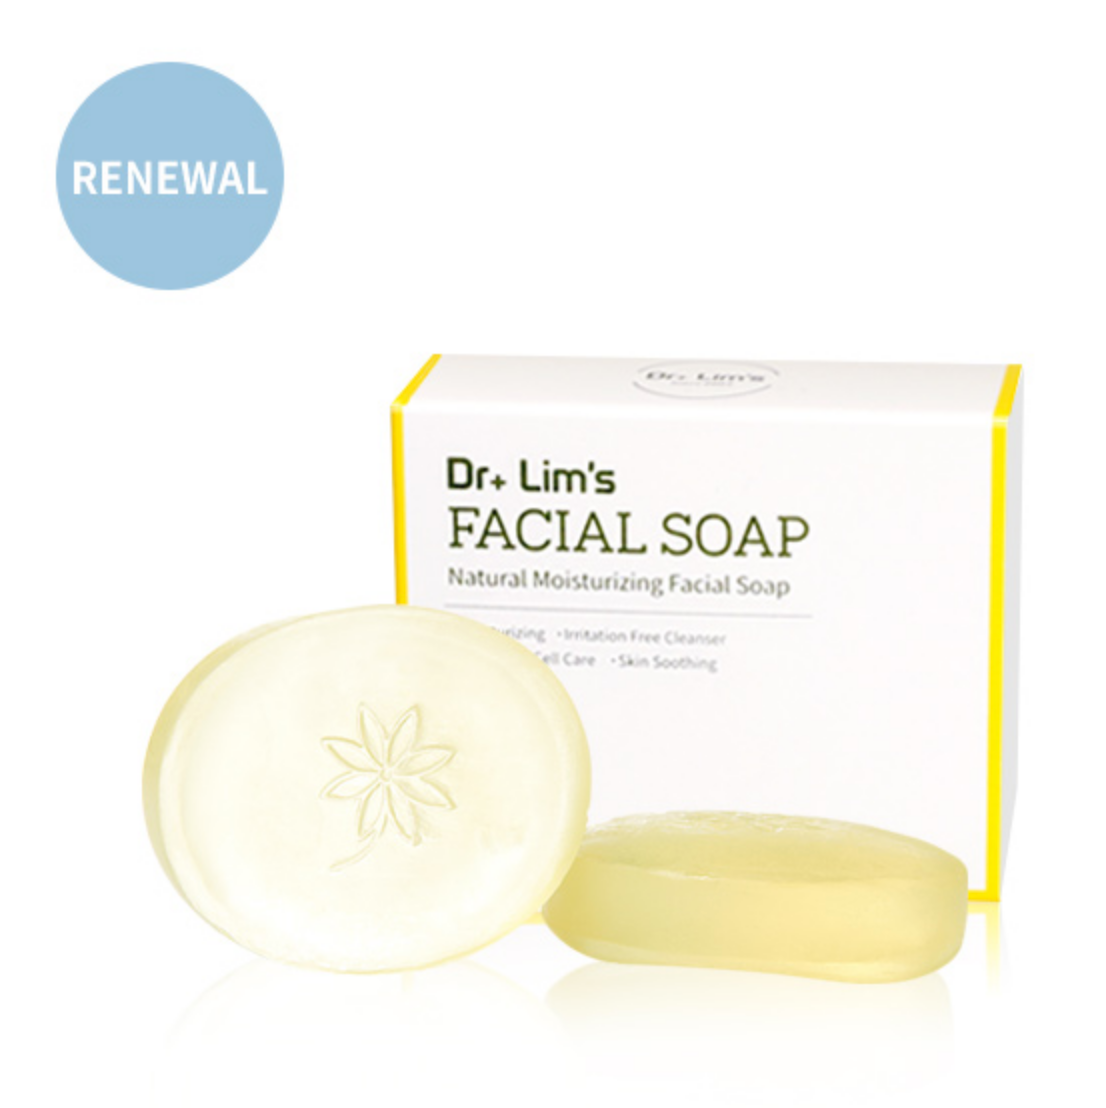 Dr+ Lim's Facial Soap 100g - Dotrade Express. Trusted Korea Manufacturers. Find the best Korean Brands